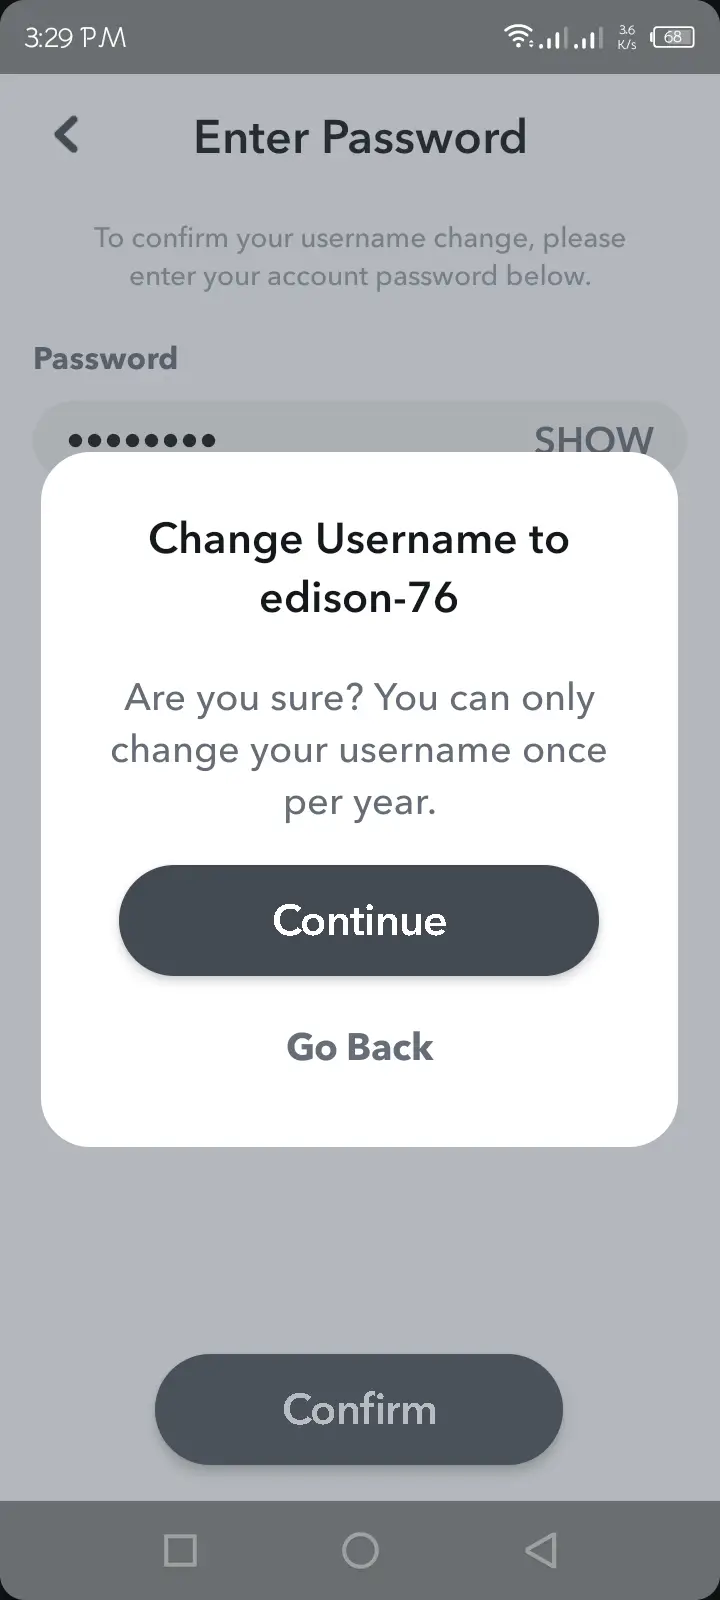 Finalize Your Username Change